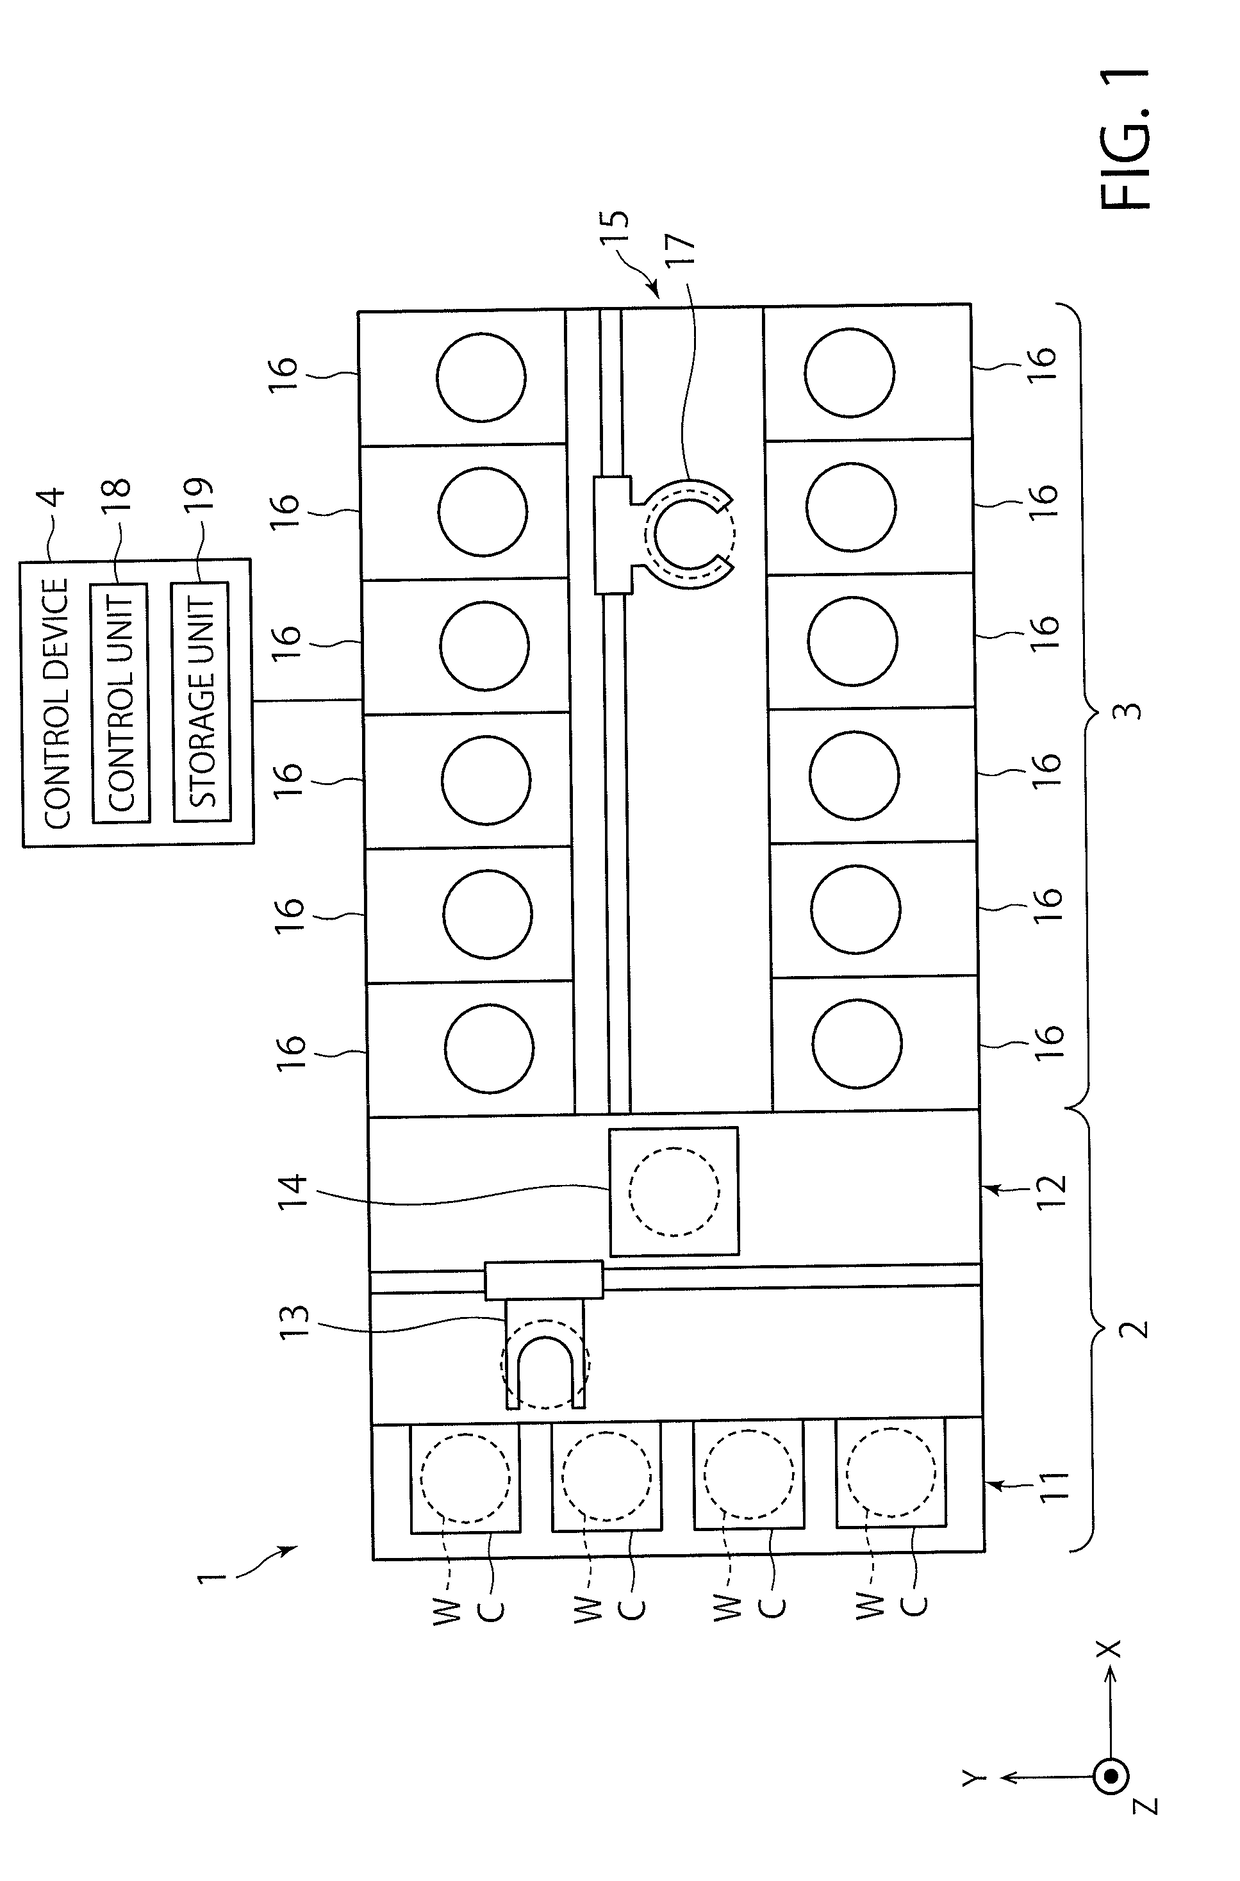 Substrate liquid treatment apparatus, tank cleaning method and non-transitory storage medium